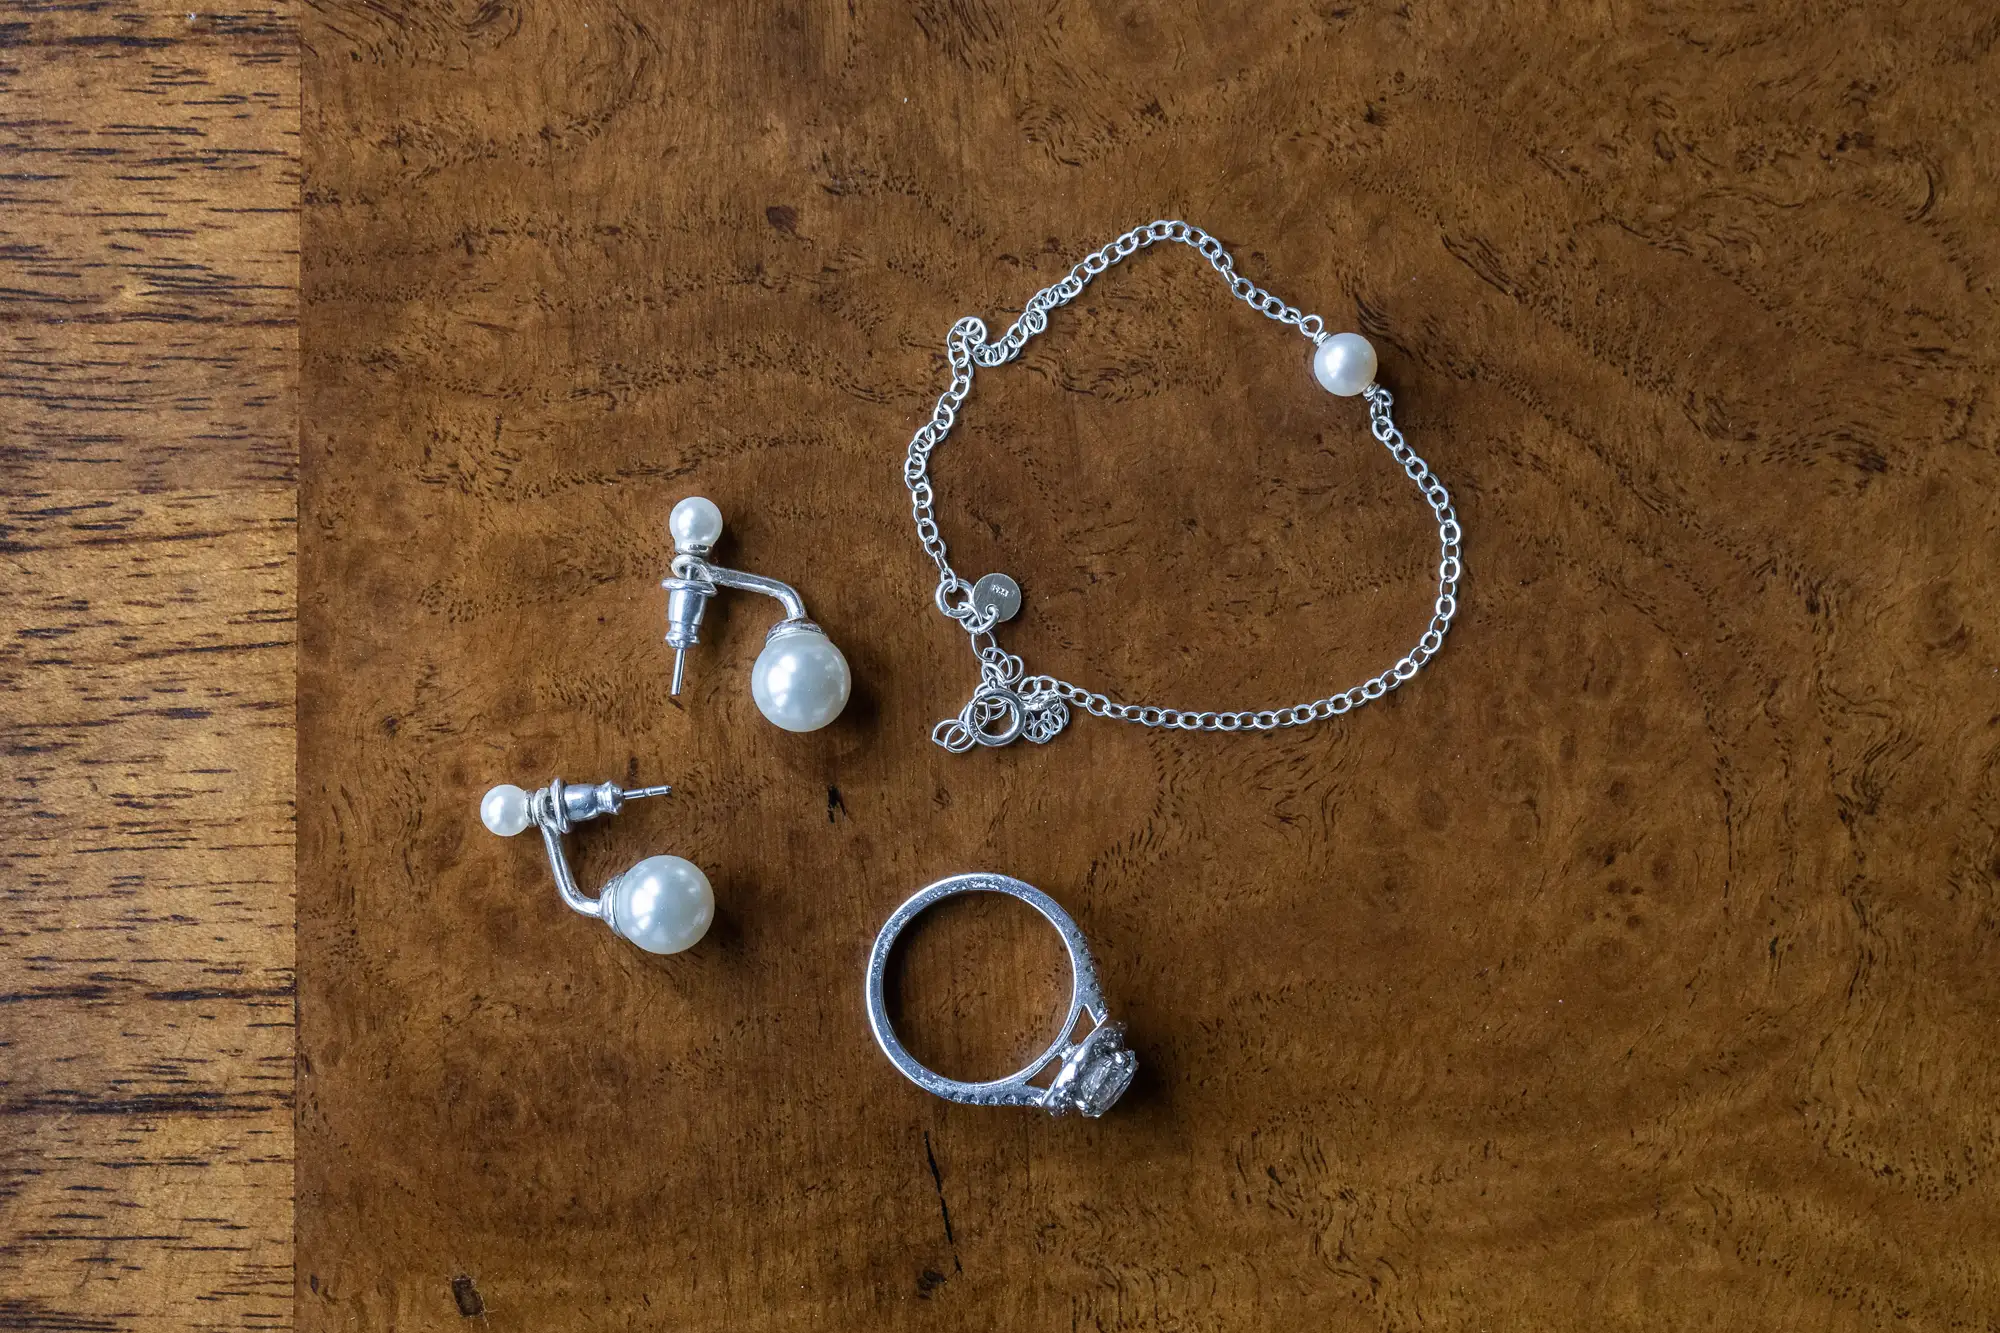 Pearl earrings, a silver bracelet with a heart charm, and a diamond ring displayed on a wooden surface.